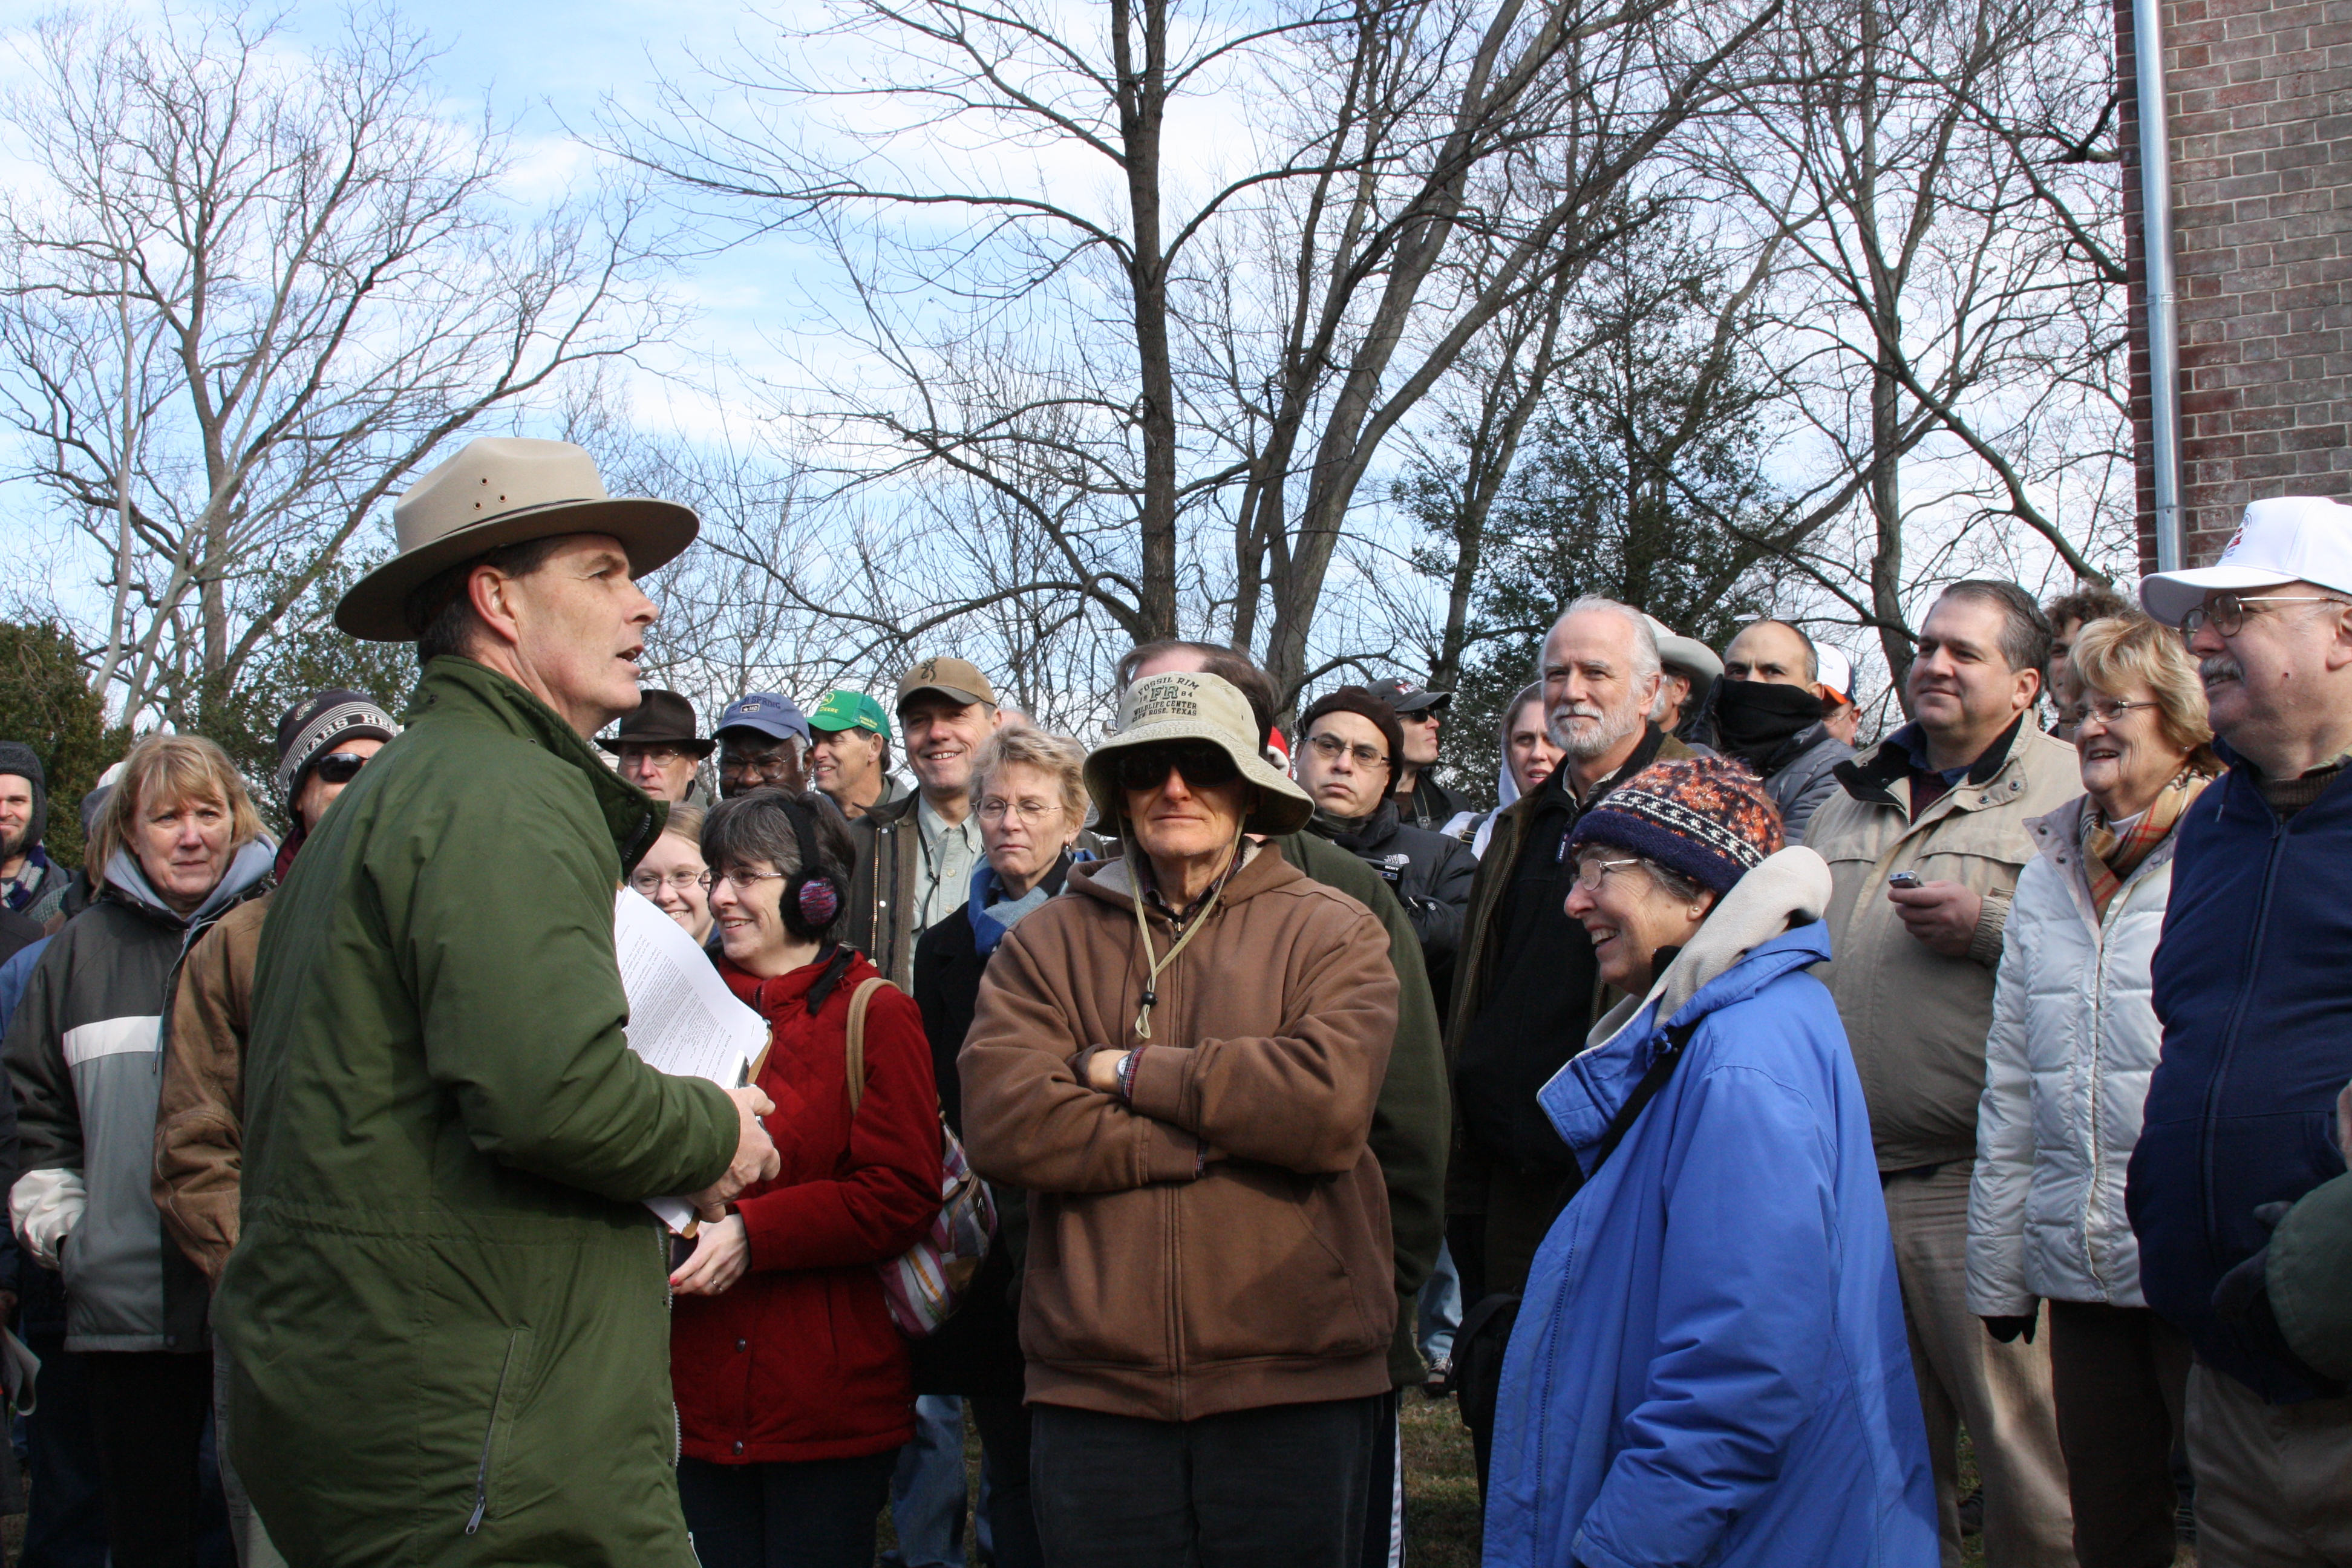 A Park Ranger speaking to a group of people outside.